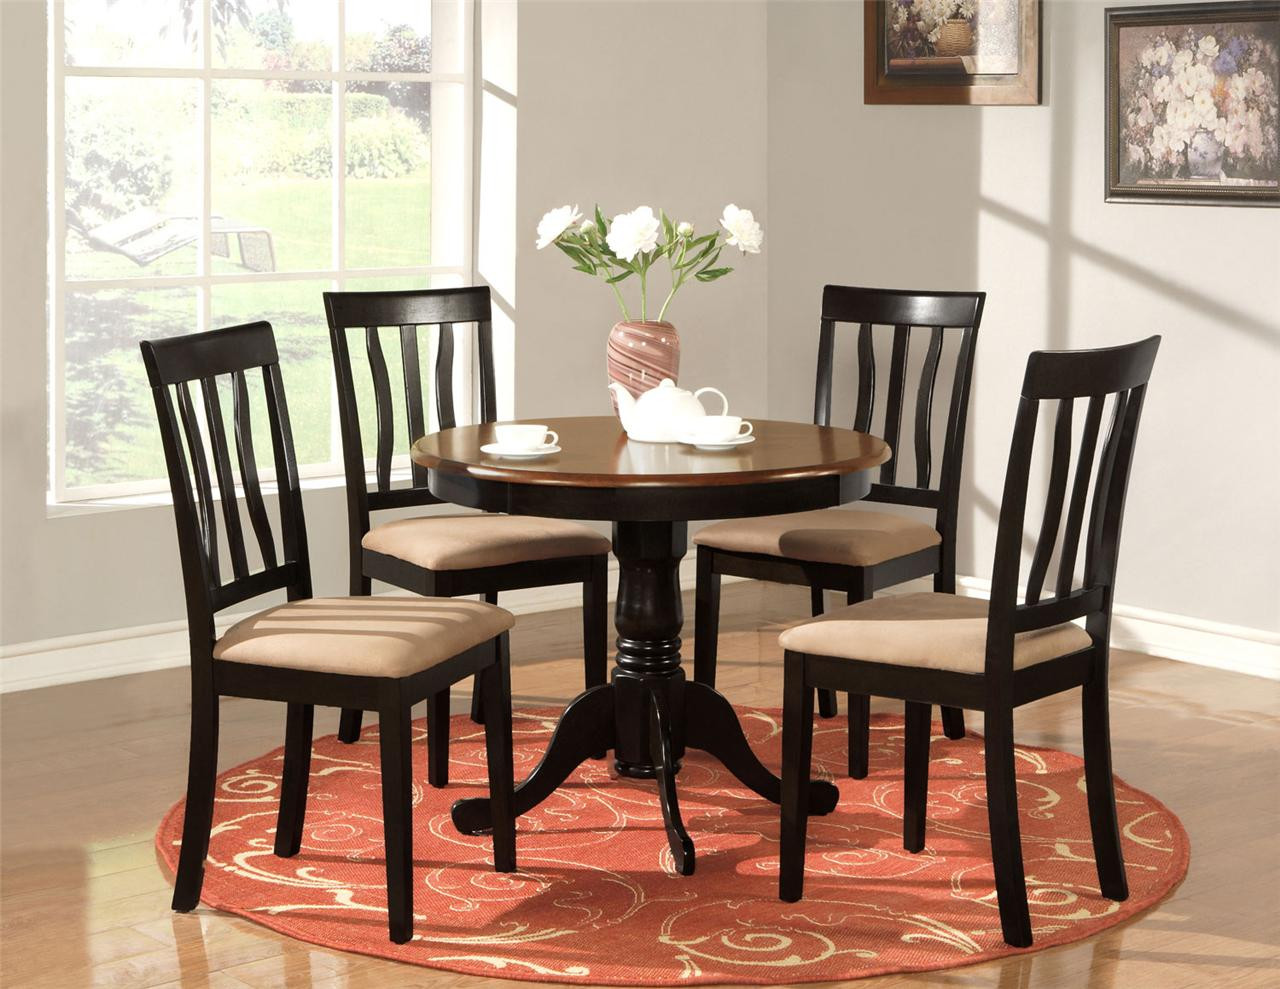 Small Round Kitchen Tables
 Square vs Round Kitchen Tables What to Choose Traba Homes